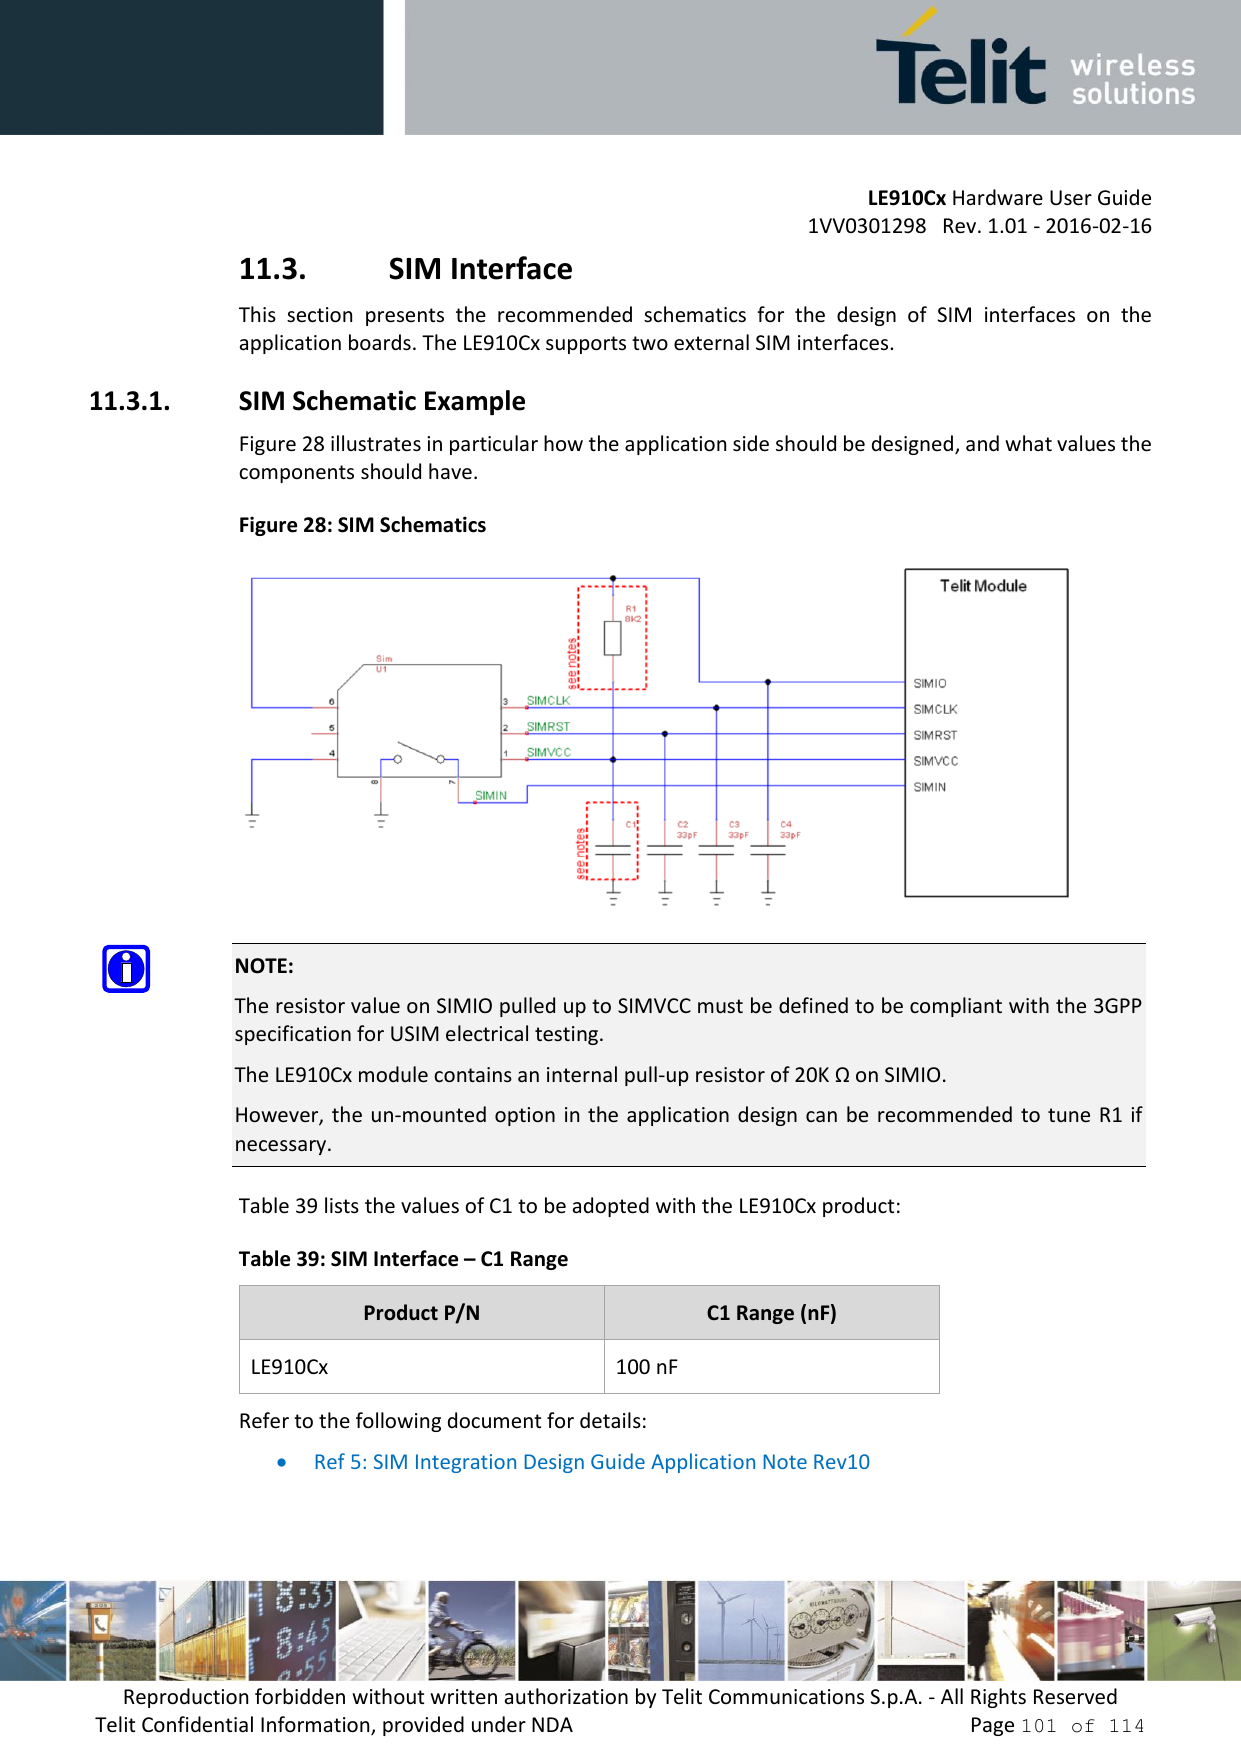 LE910Cx Hardware User Guide 1VV0301298   Rev. 1.01 - 2016-02-16 Reproduction forbidden without written authorization by Telit Communications S.p.A. - All Rights Reserved Telit Confidential Information, provided under NDA   Page 101 of 114 11.3. SIM Interface This  section  presents  the  recommended  schematics  for  the  design  of  SIM  interfaces  on  the application boards. The LE910Cx supports two external SIM interfaces. 11.3.1. SIM Schematic Example Figure 28 illustrates in particular how the application side should be designed, and what values the components should have. Figure 28: SIM Schematics NOTE: The resistor value on SIMIO pulled up to SIMVCC must be defined to be compliant with the 3GPP specification for USIM electrical testing. The LE910Cx module contains an internal pull-up resistor of 20K Ω on SIMIO. However, the  un-mounted option  in the application design can  be recommended to tune R1 if necessary. Table 39 lists the values of C1 to be adopted with the LE910Cx product: Table 39: SIM Interface – C1 Range Product P/N C1 Range (nF) LE910Cx 100 nF Refer to the following document for details: Ref 5: SIM Integration Design Guide Application Note Rev10